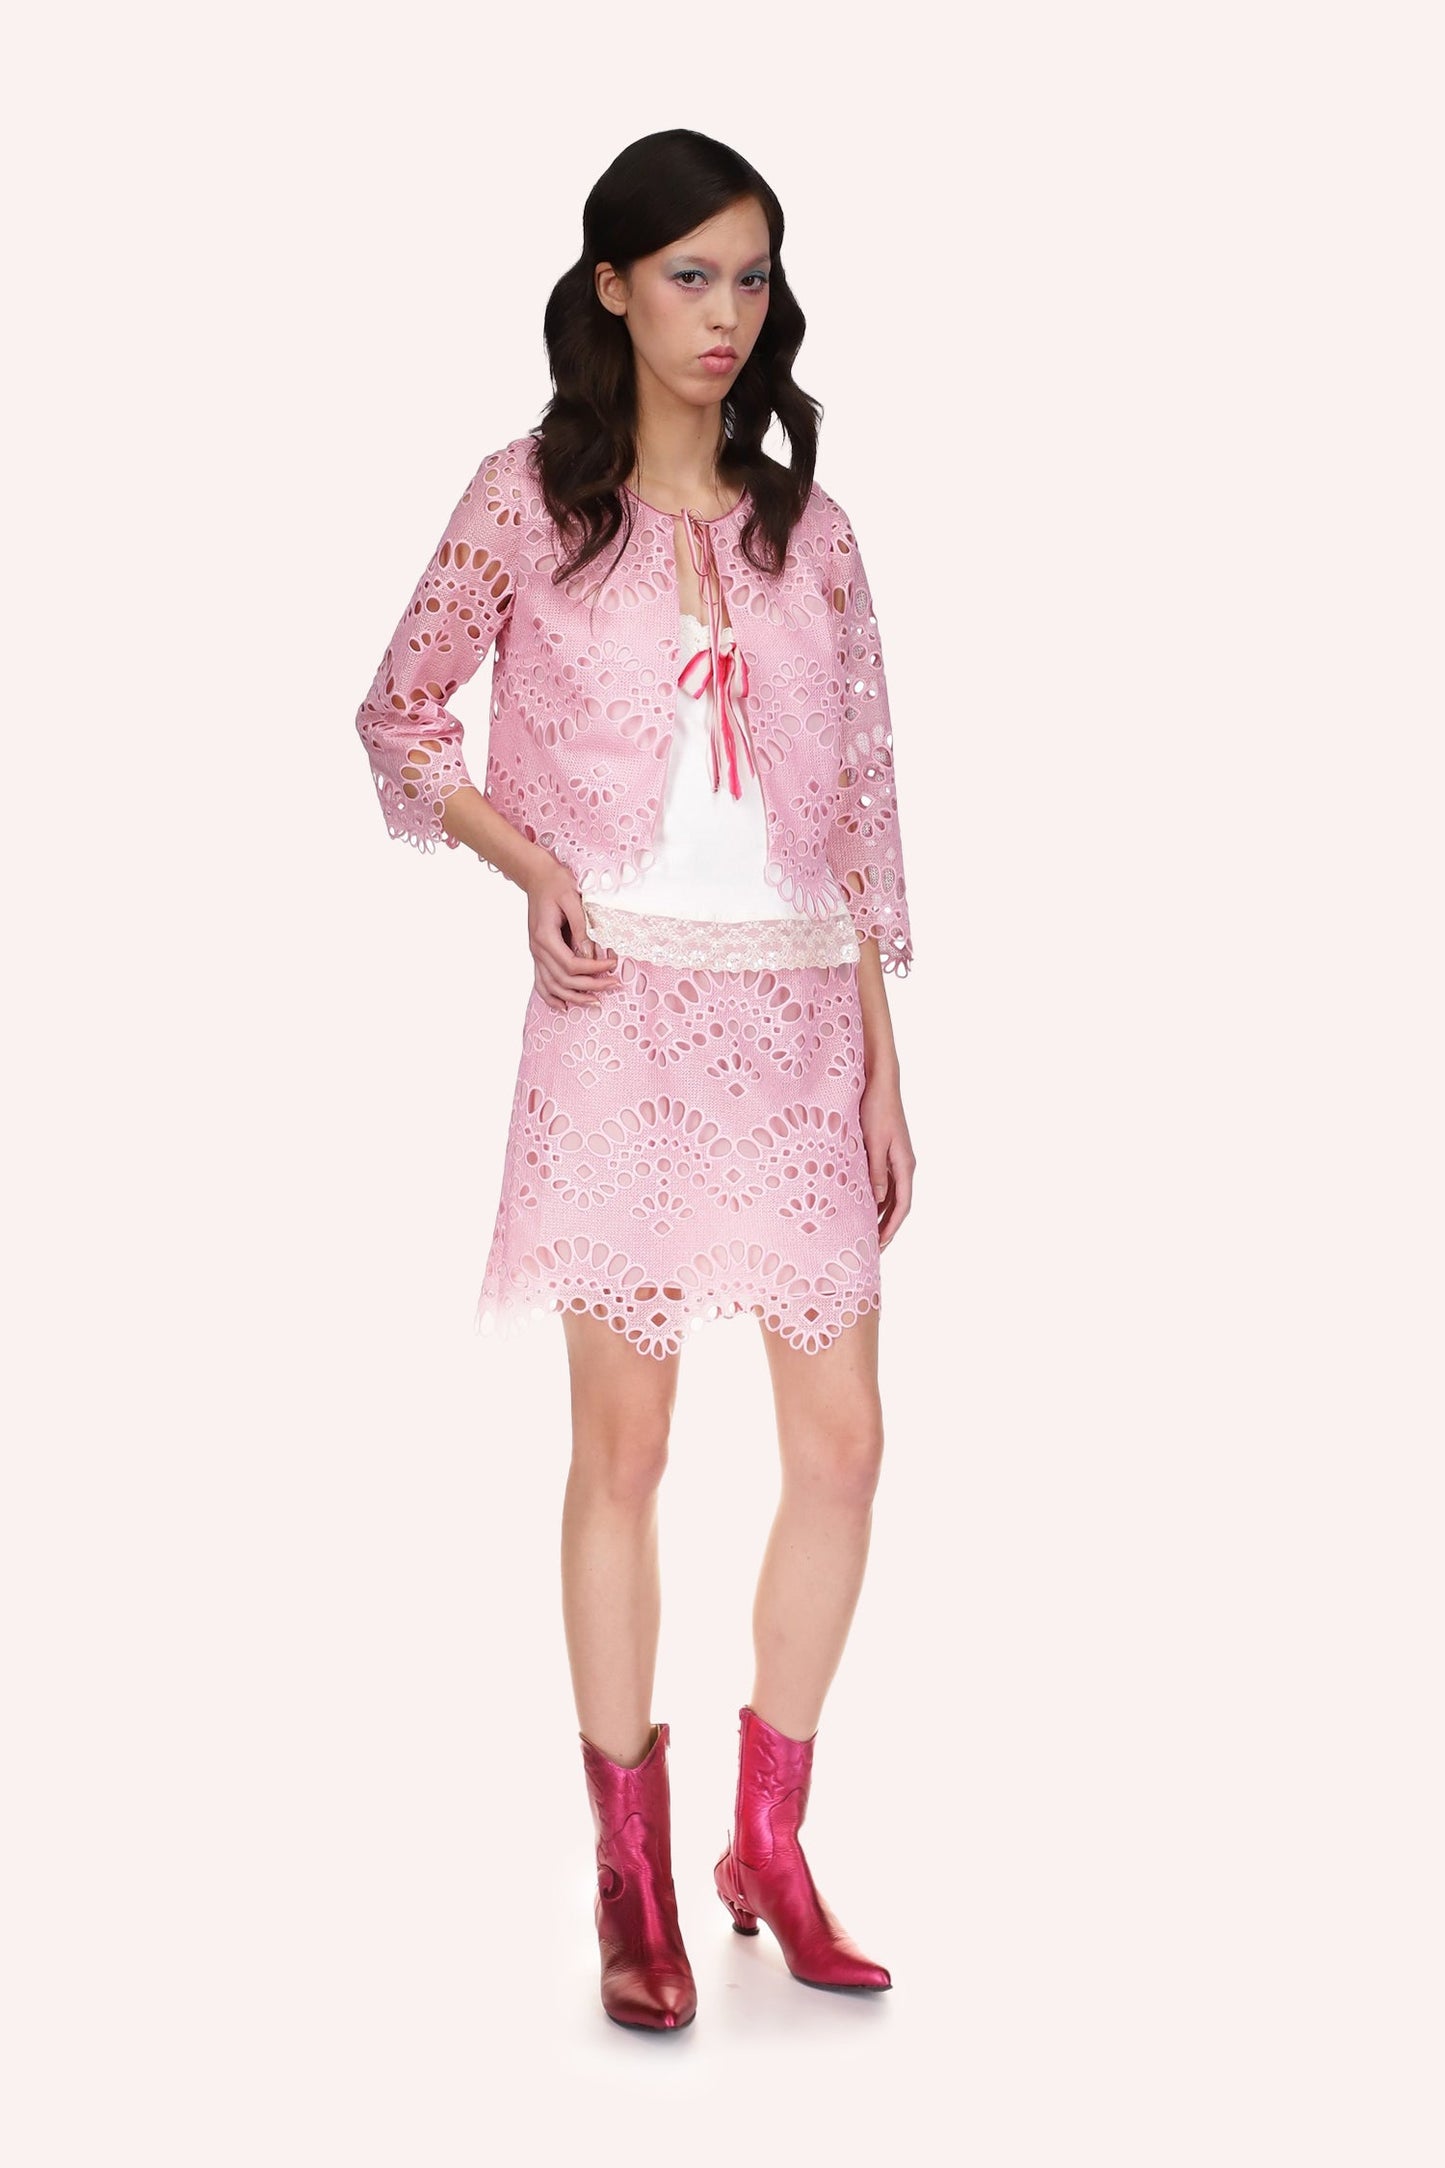 Eyelet Skirt, pink, above knees long, large oval eyelets in a round shaped alignment.